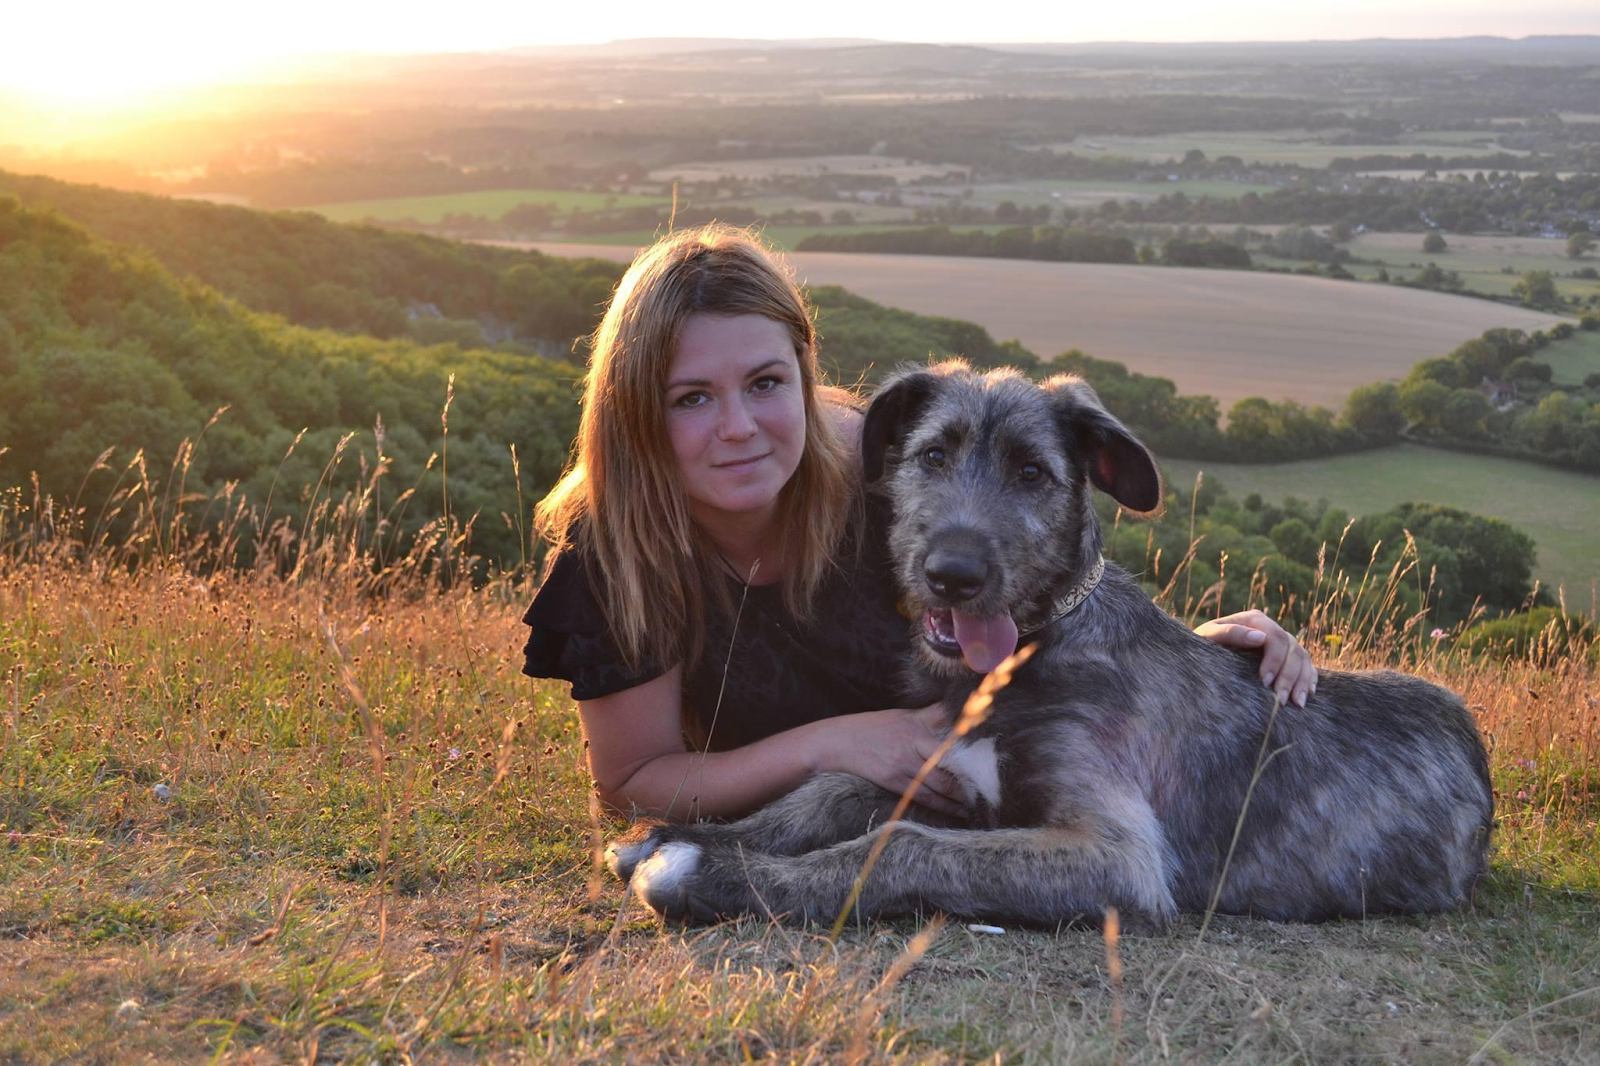 A woman and a dog who is nearly her size are lying together on a hill at sunset.